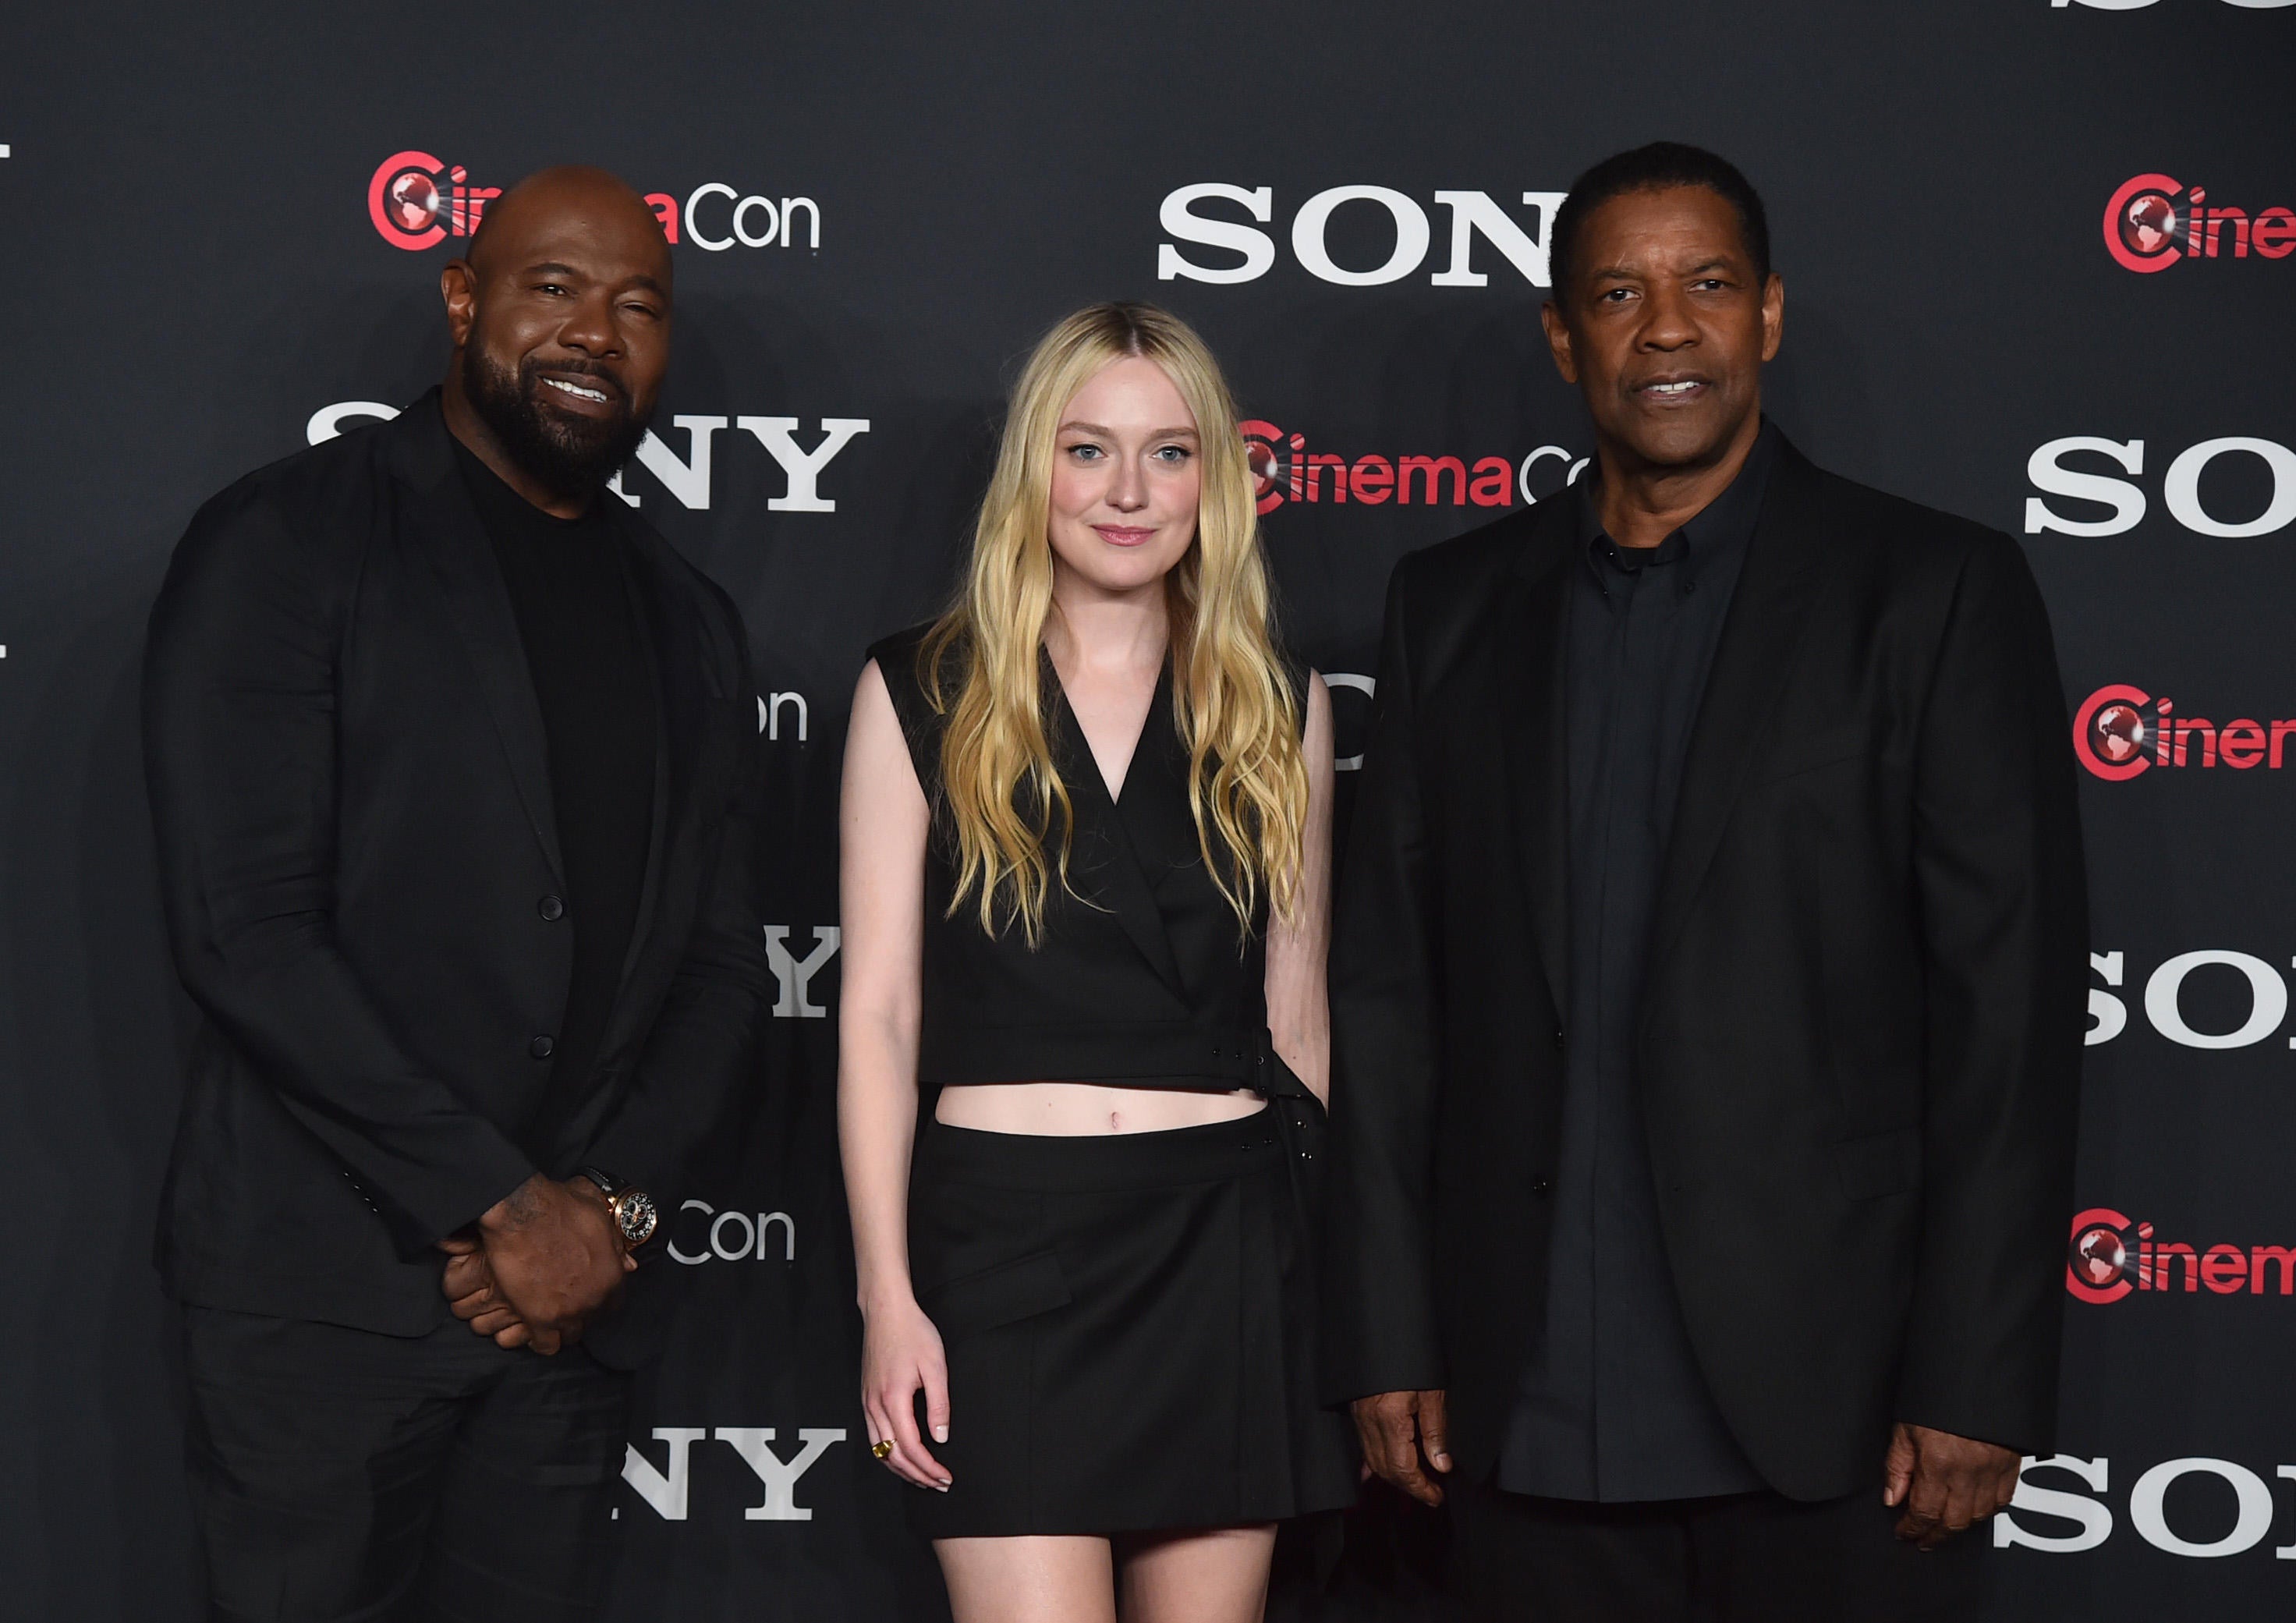 CinemaCon 2023 – CinemaCon Opening Night and Sony Pictures Entertainment Presentation